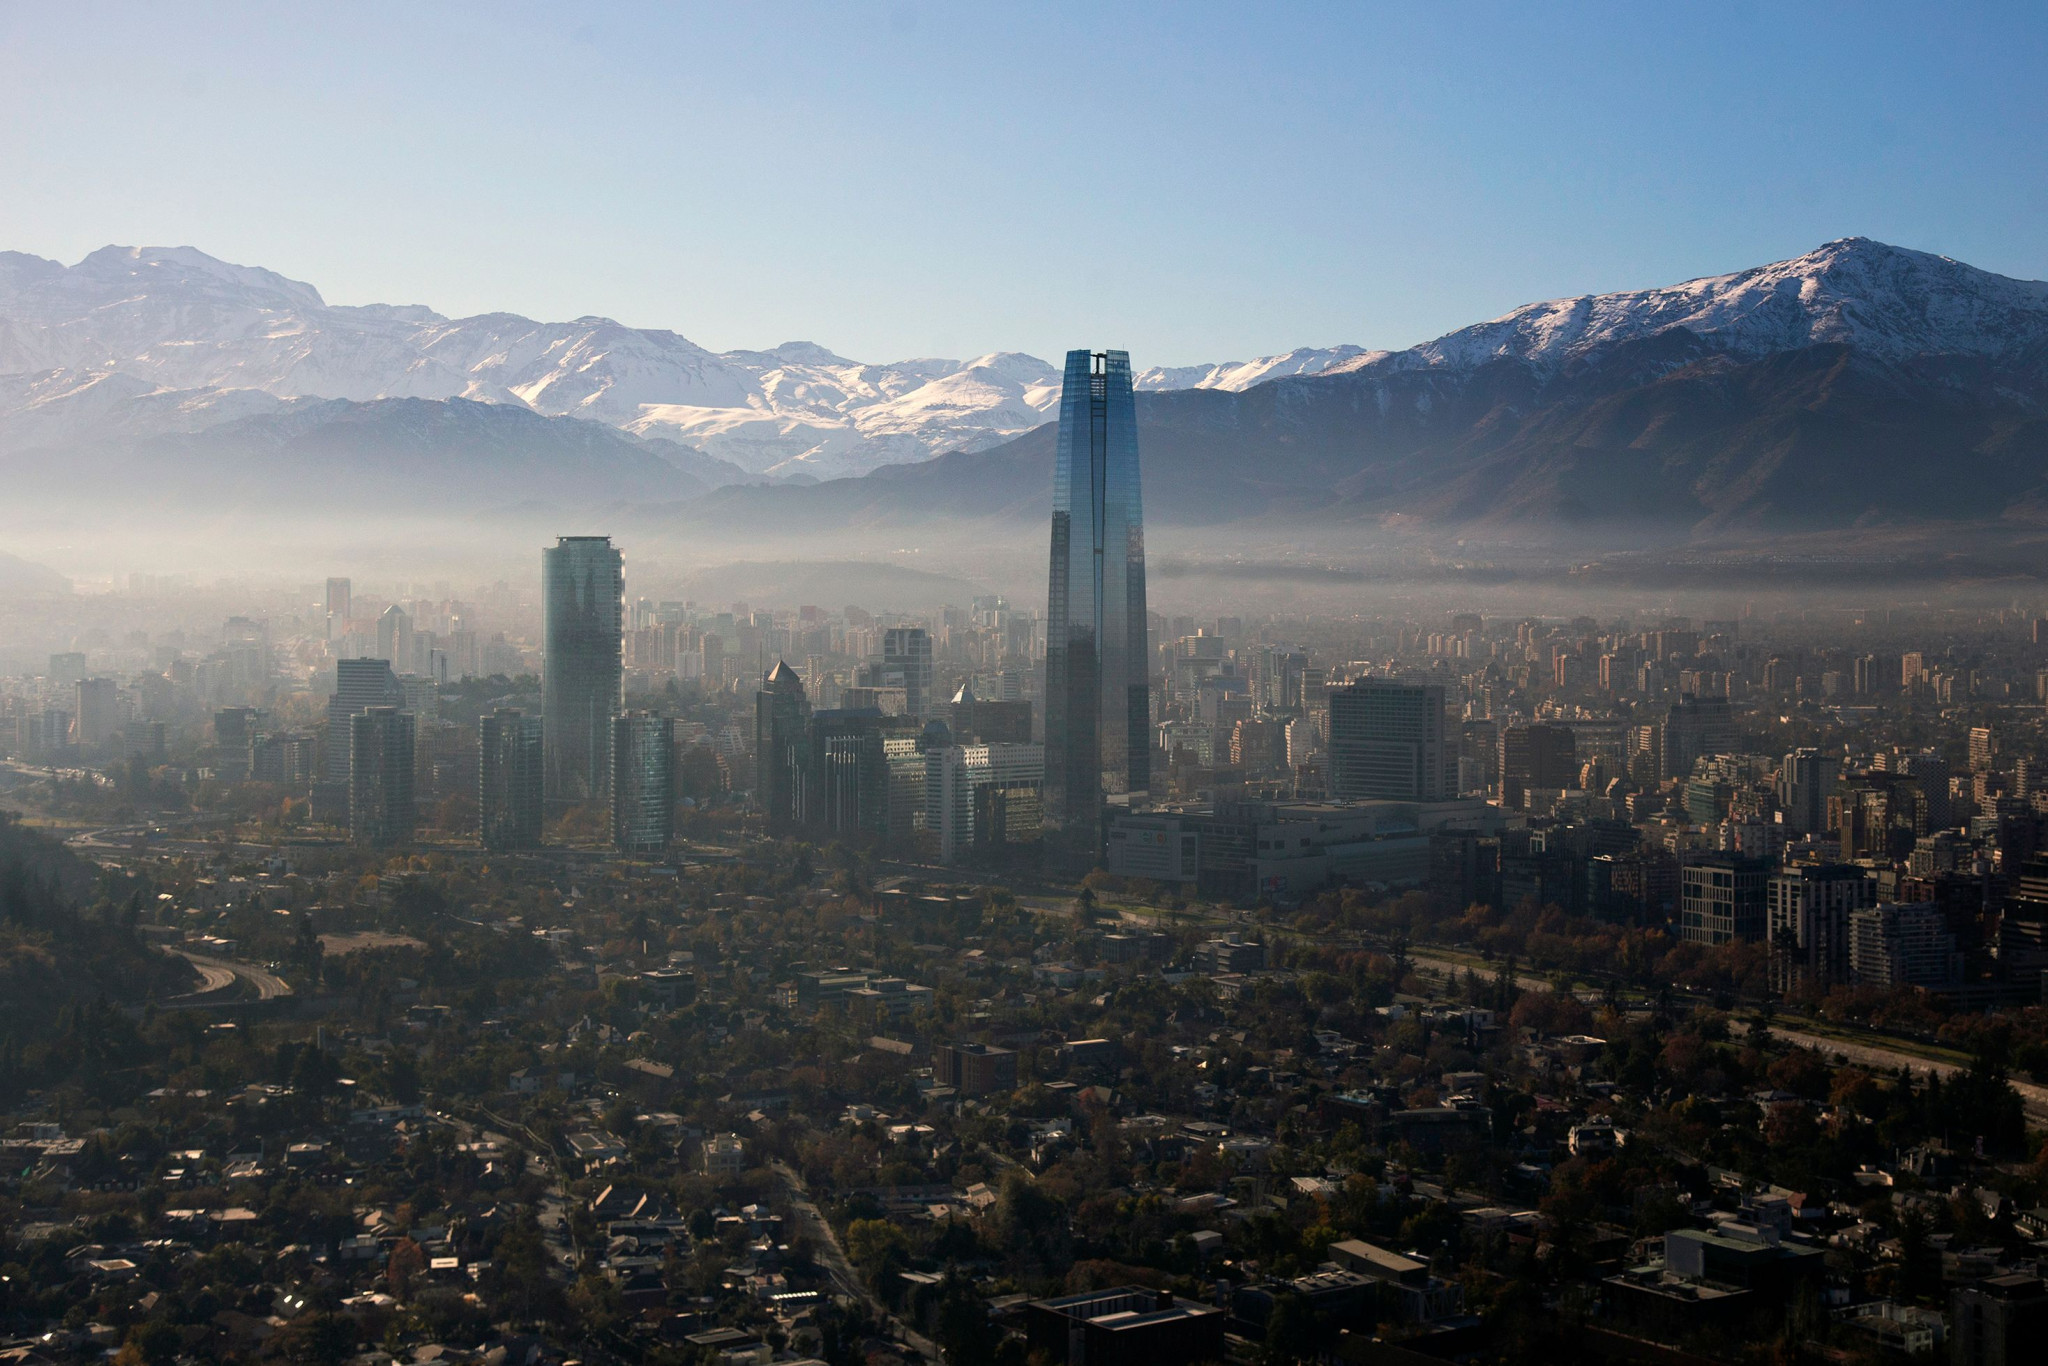 Santiago will host the 2023 Pan American Games ©Getty Images